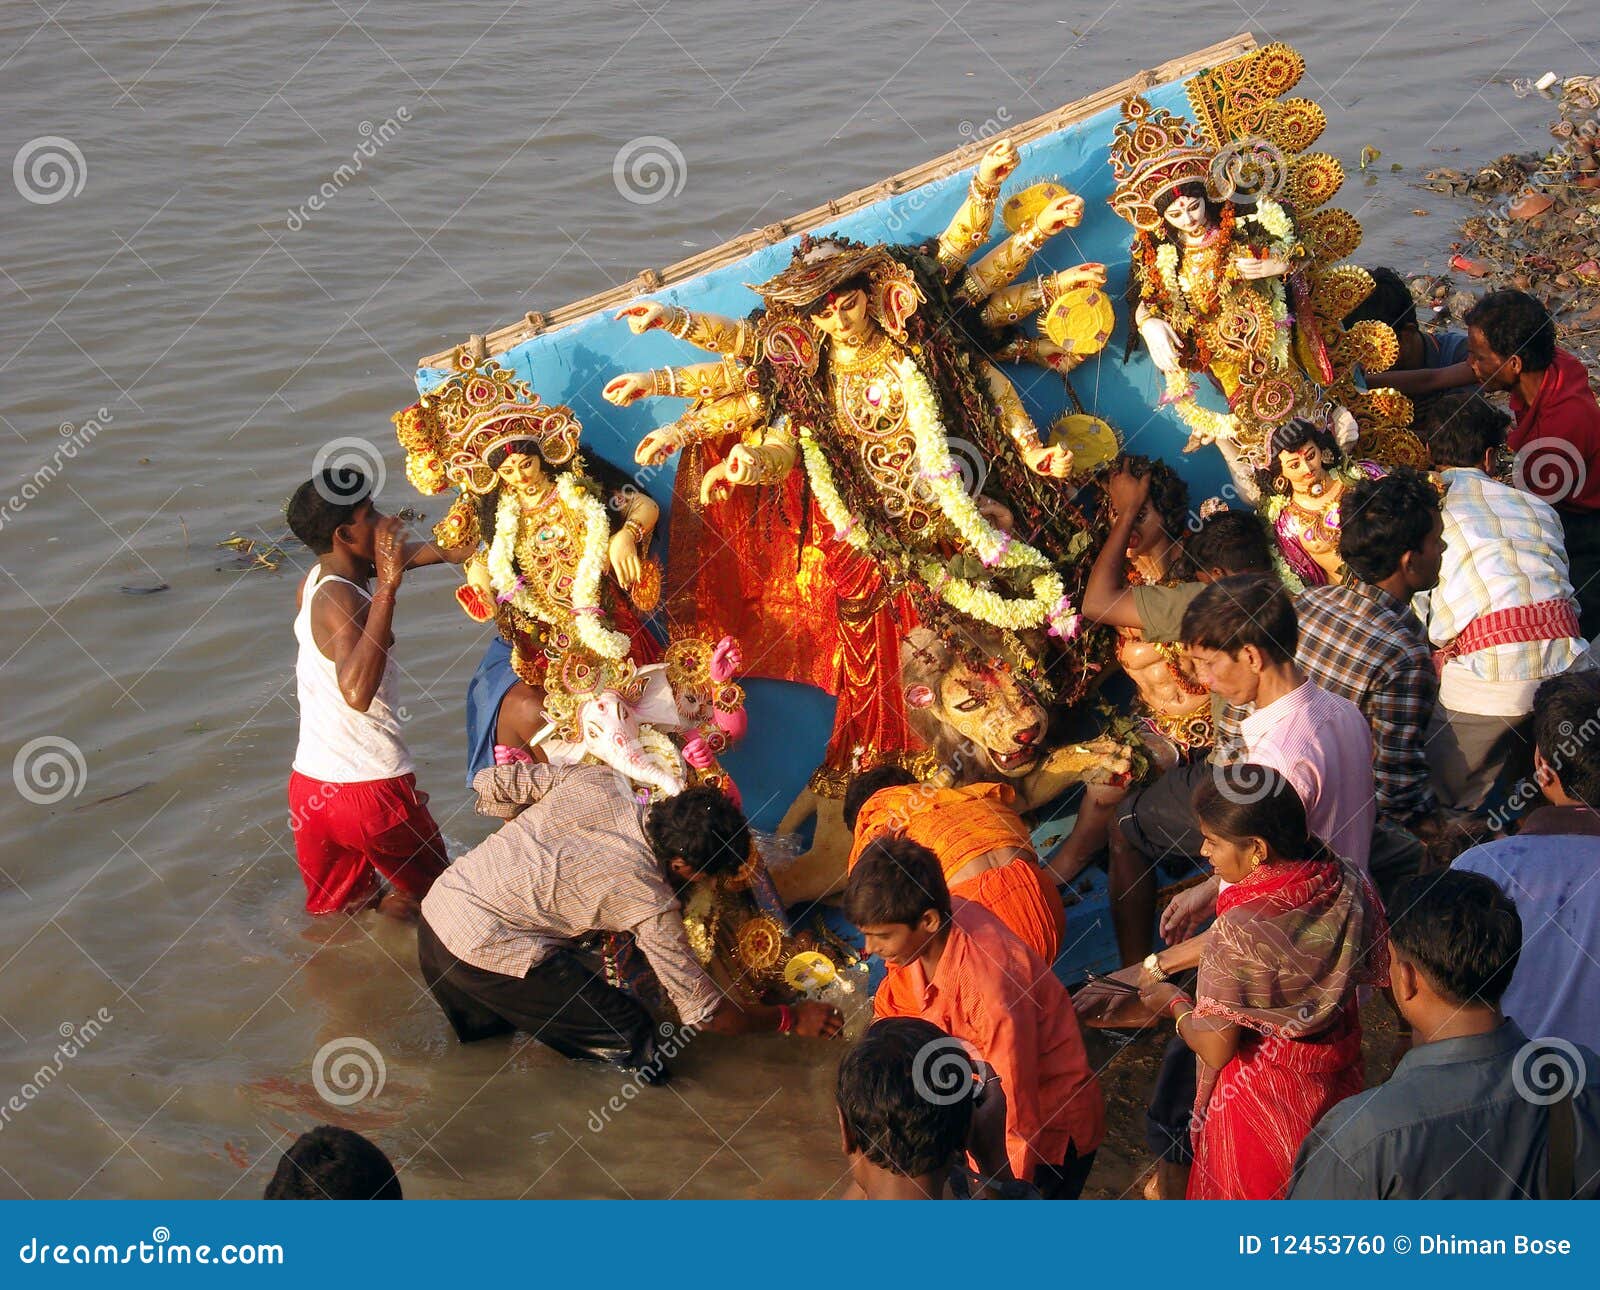 GANGA POLUTION. THE HINDU DEITY BEING IMMERSED IN THE RIVER GANGES AFTER THE FAMOUS FESTIVAL OF DURGA.